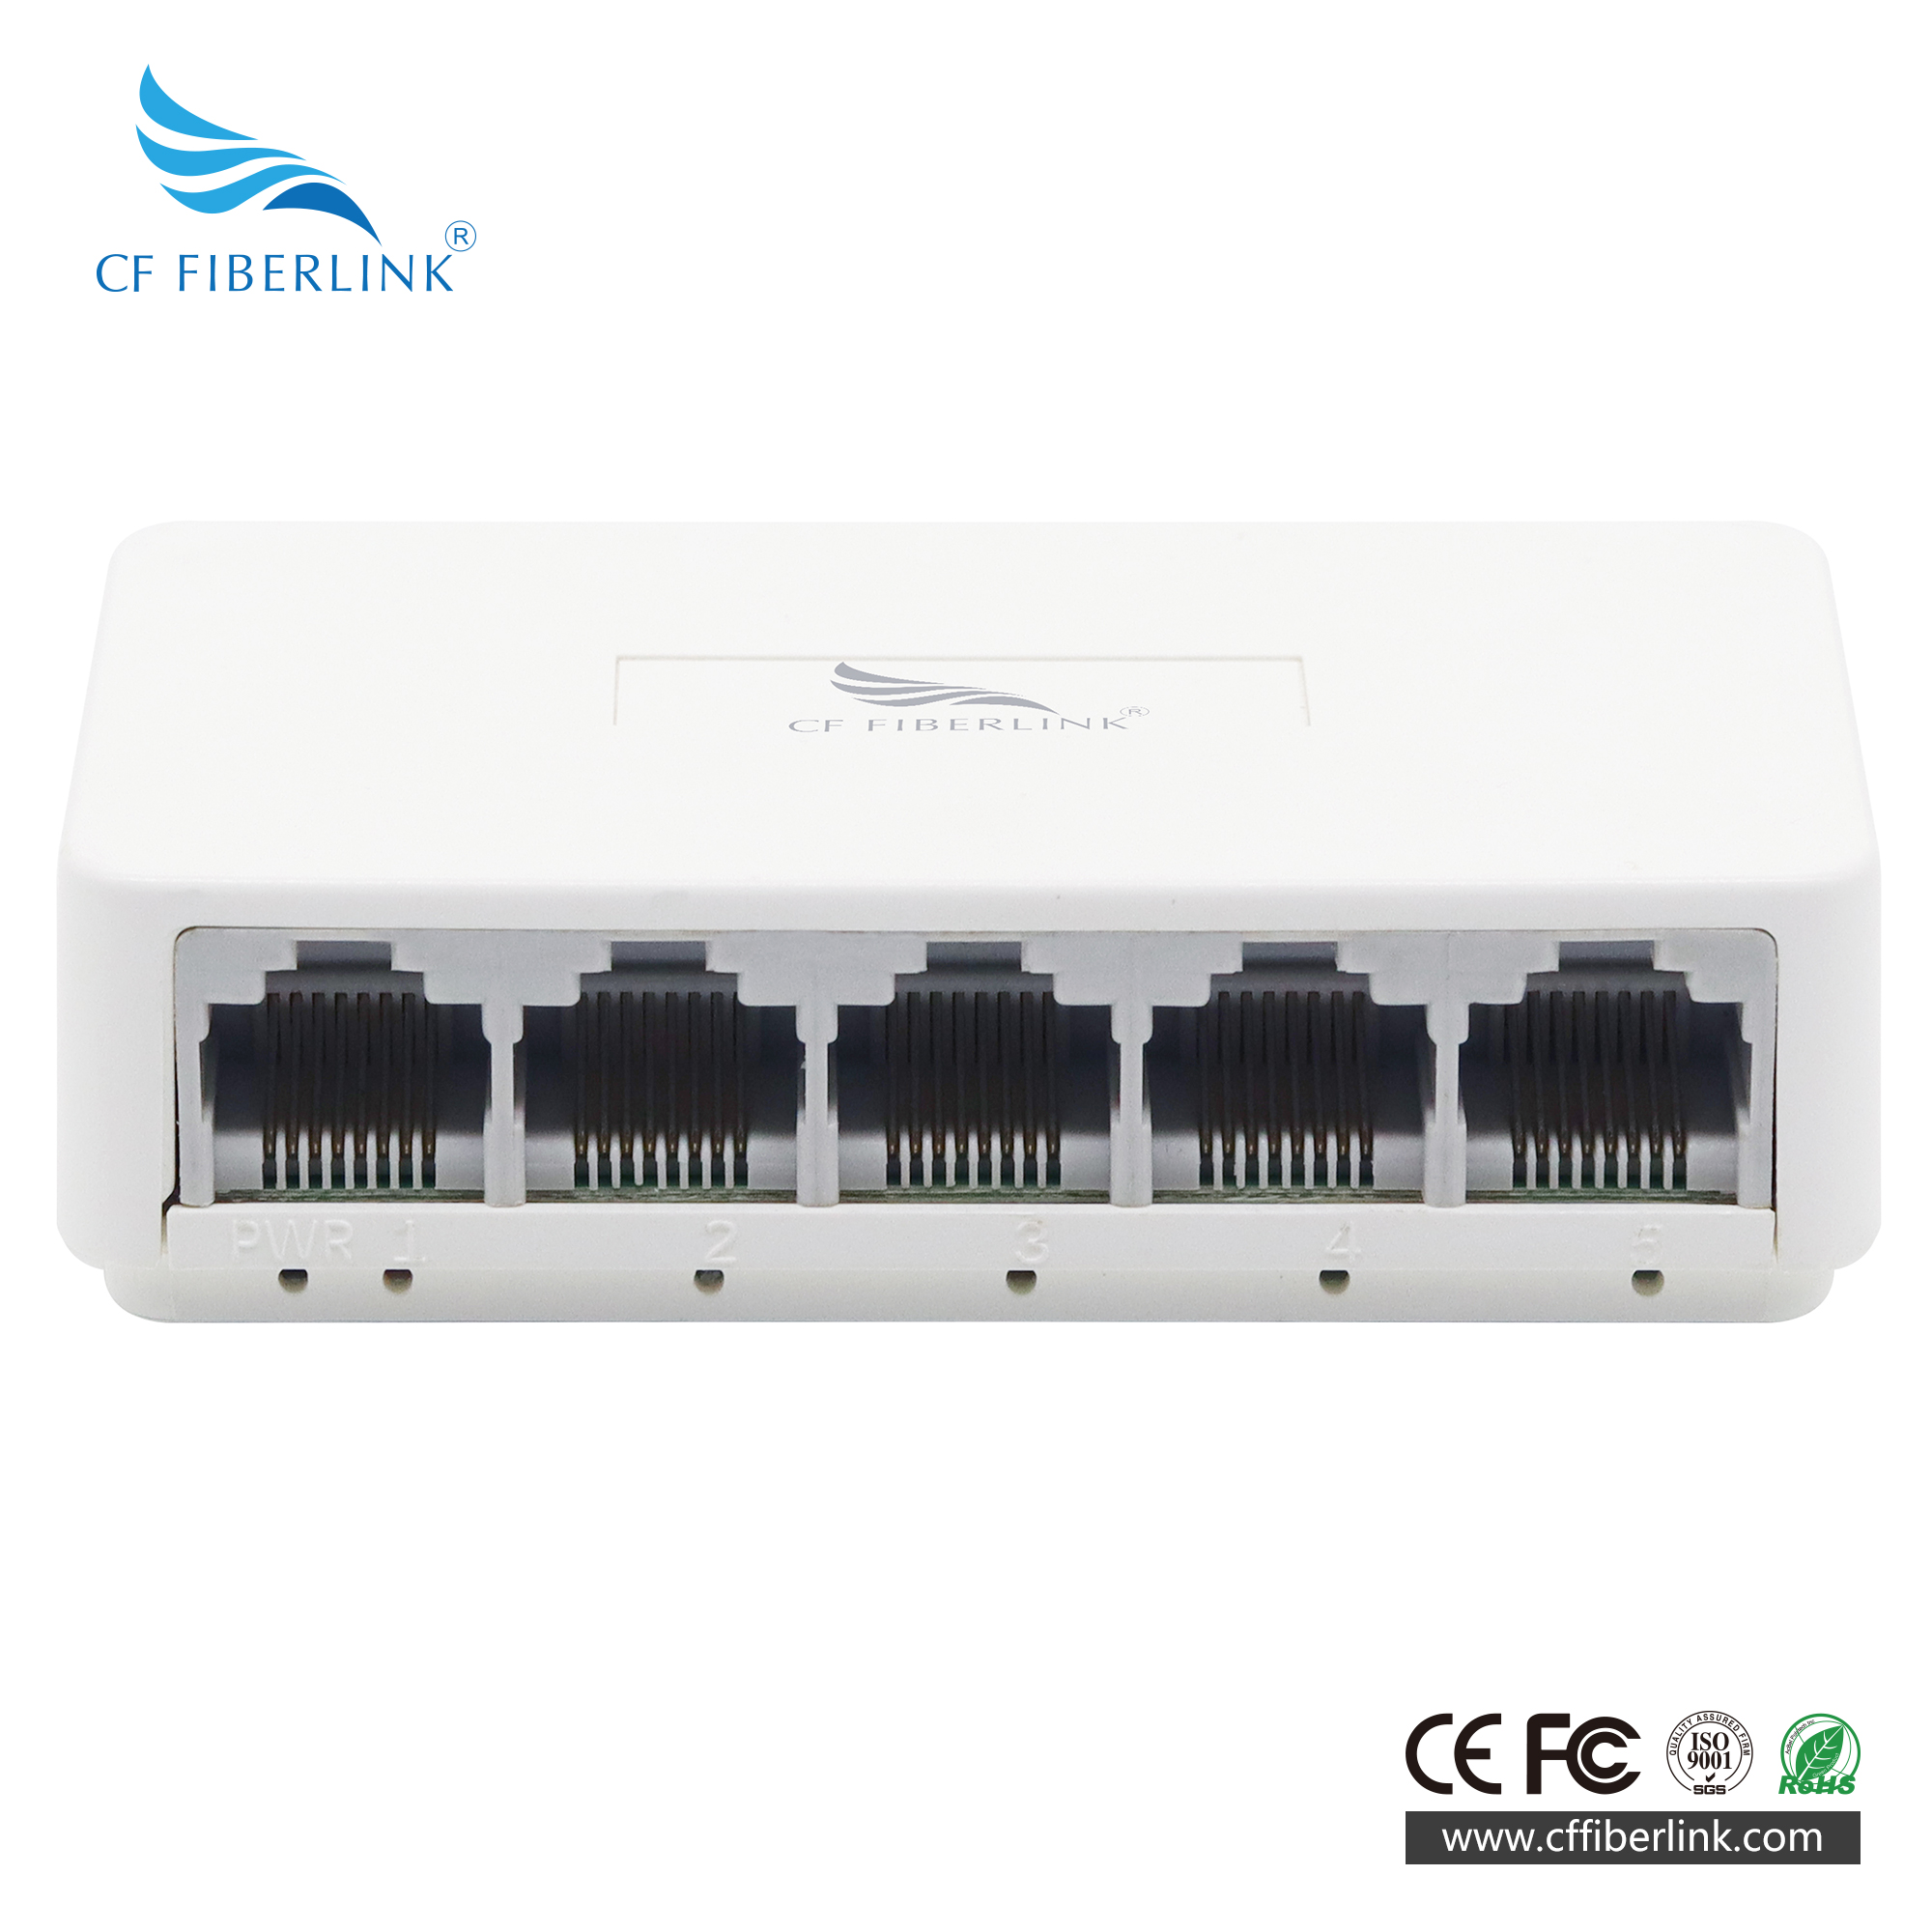 5-port 10/100M Ethernet Switch Featured Image